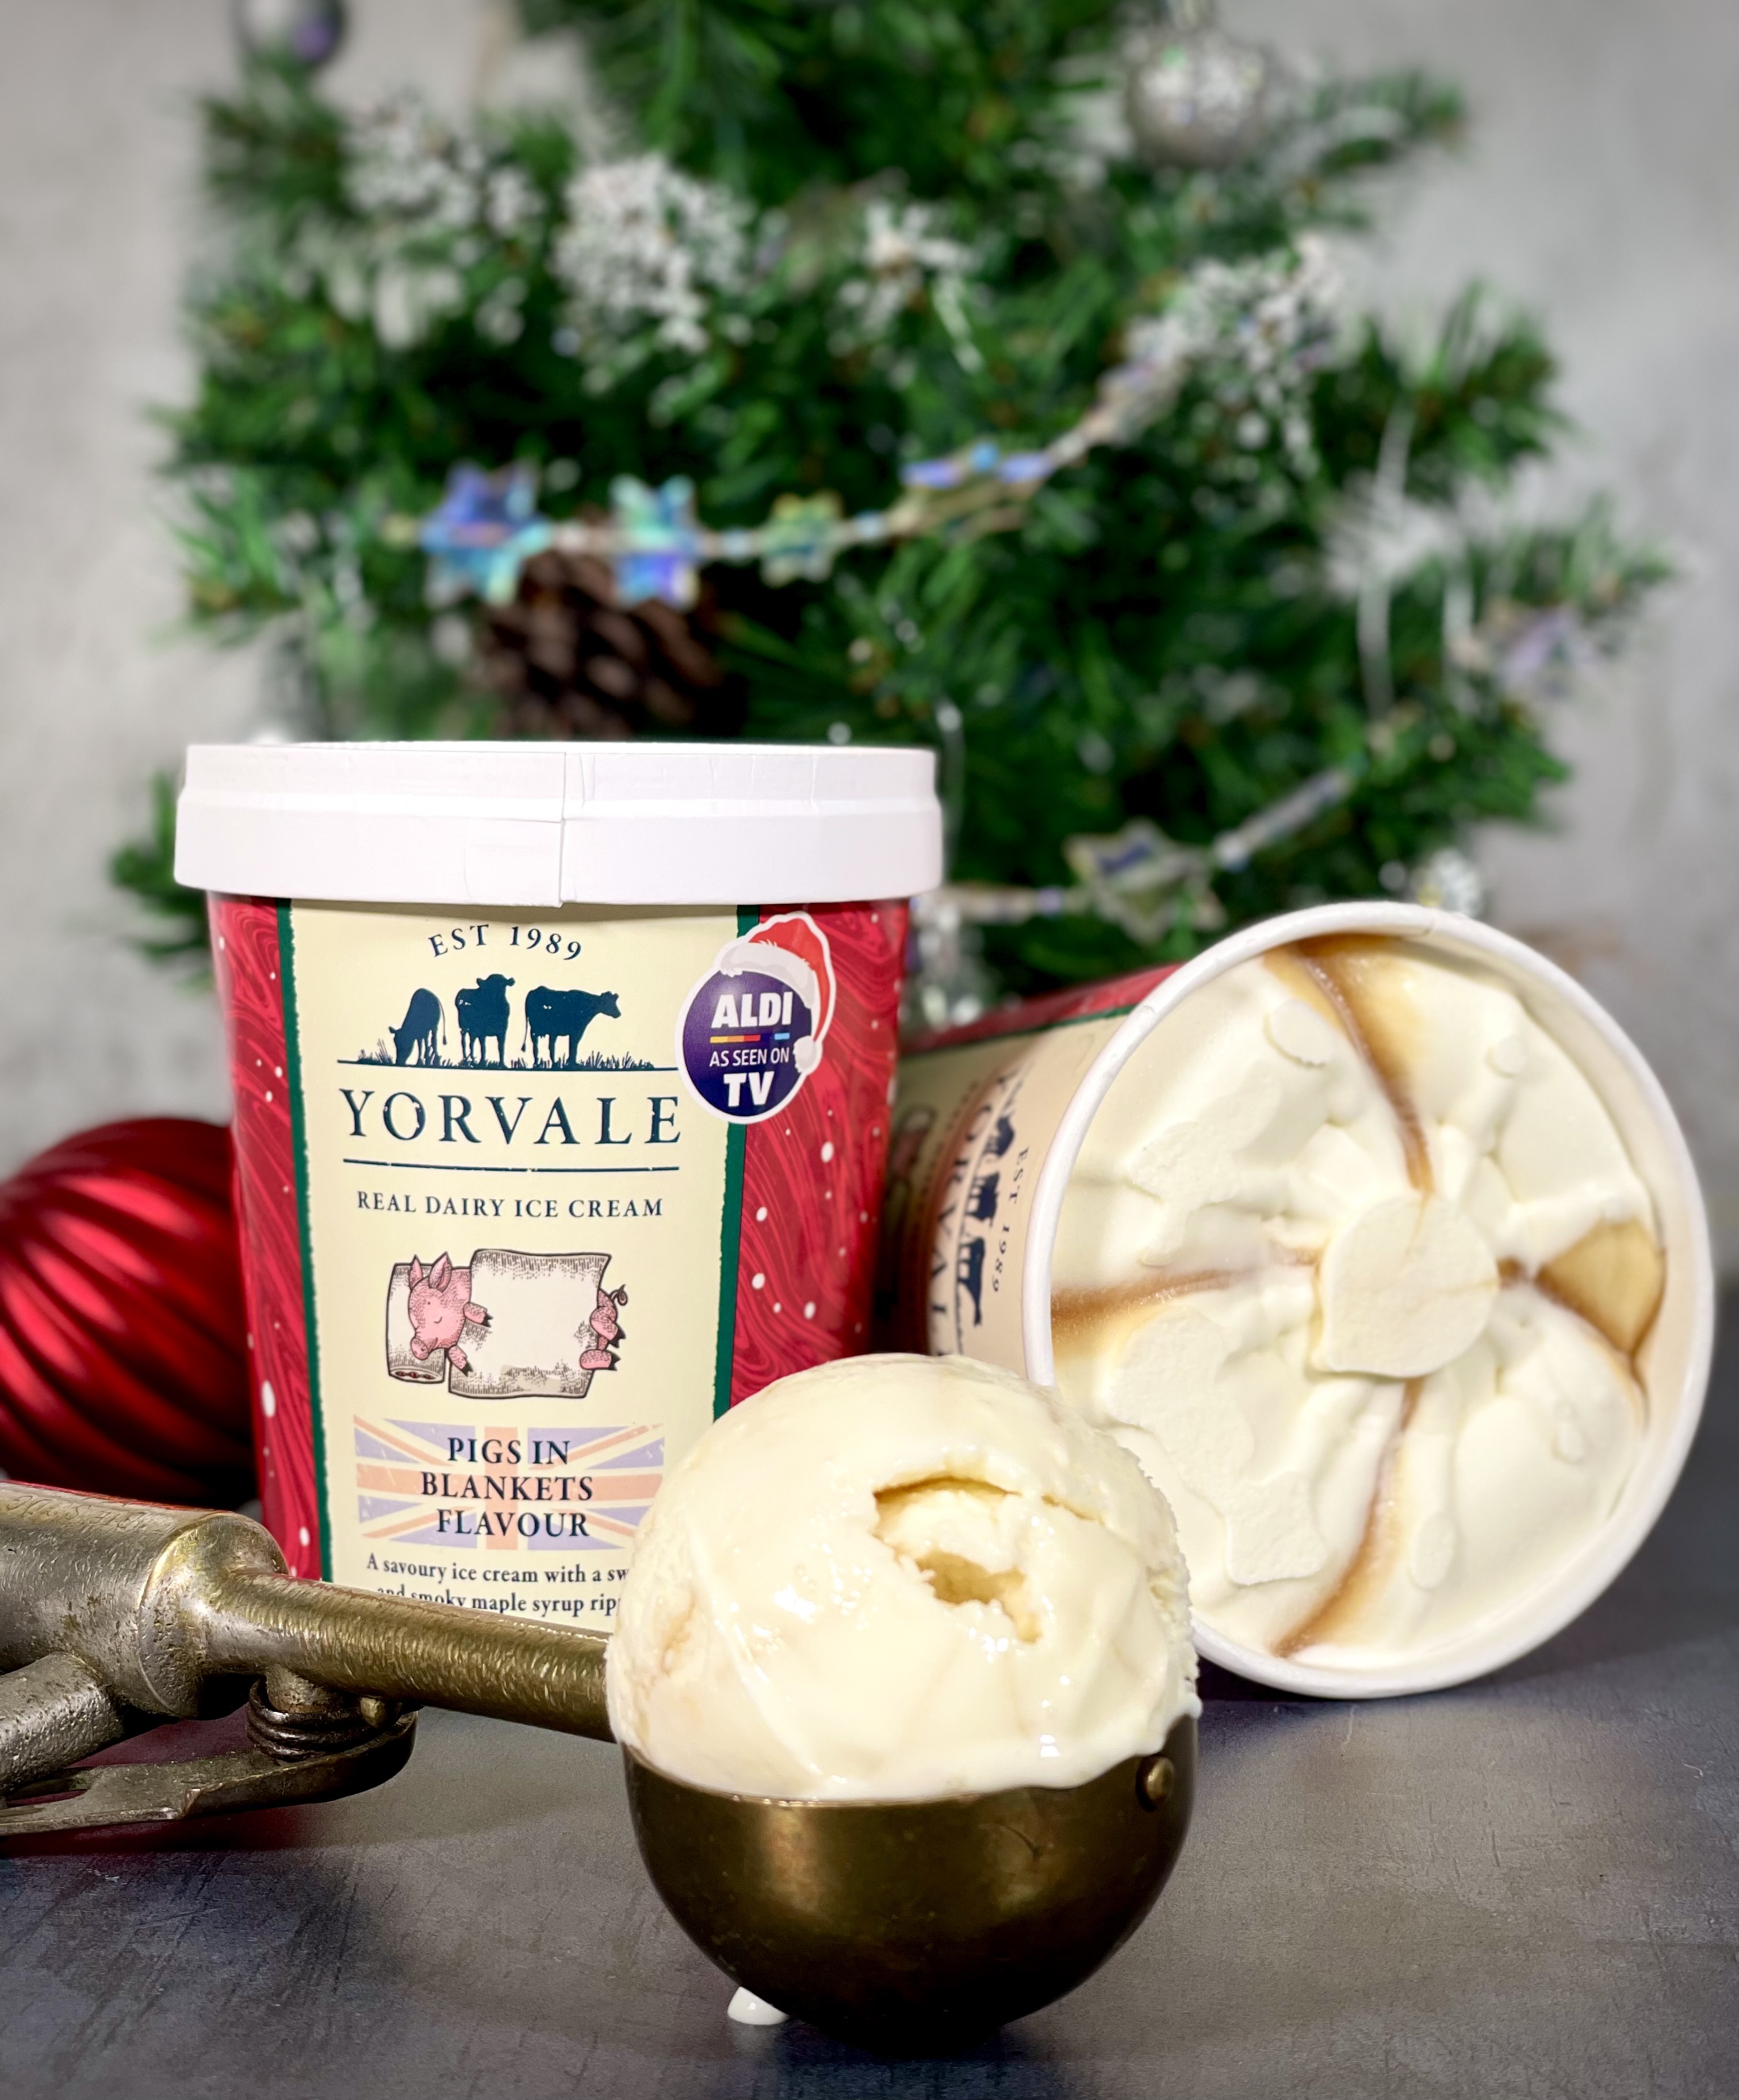 A close up of the Yorvale pigs in blankets ice cream thats hitting Aldi shelves this Christmas.